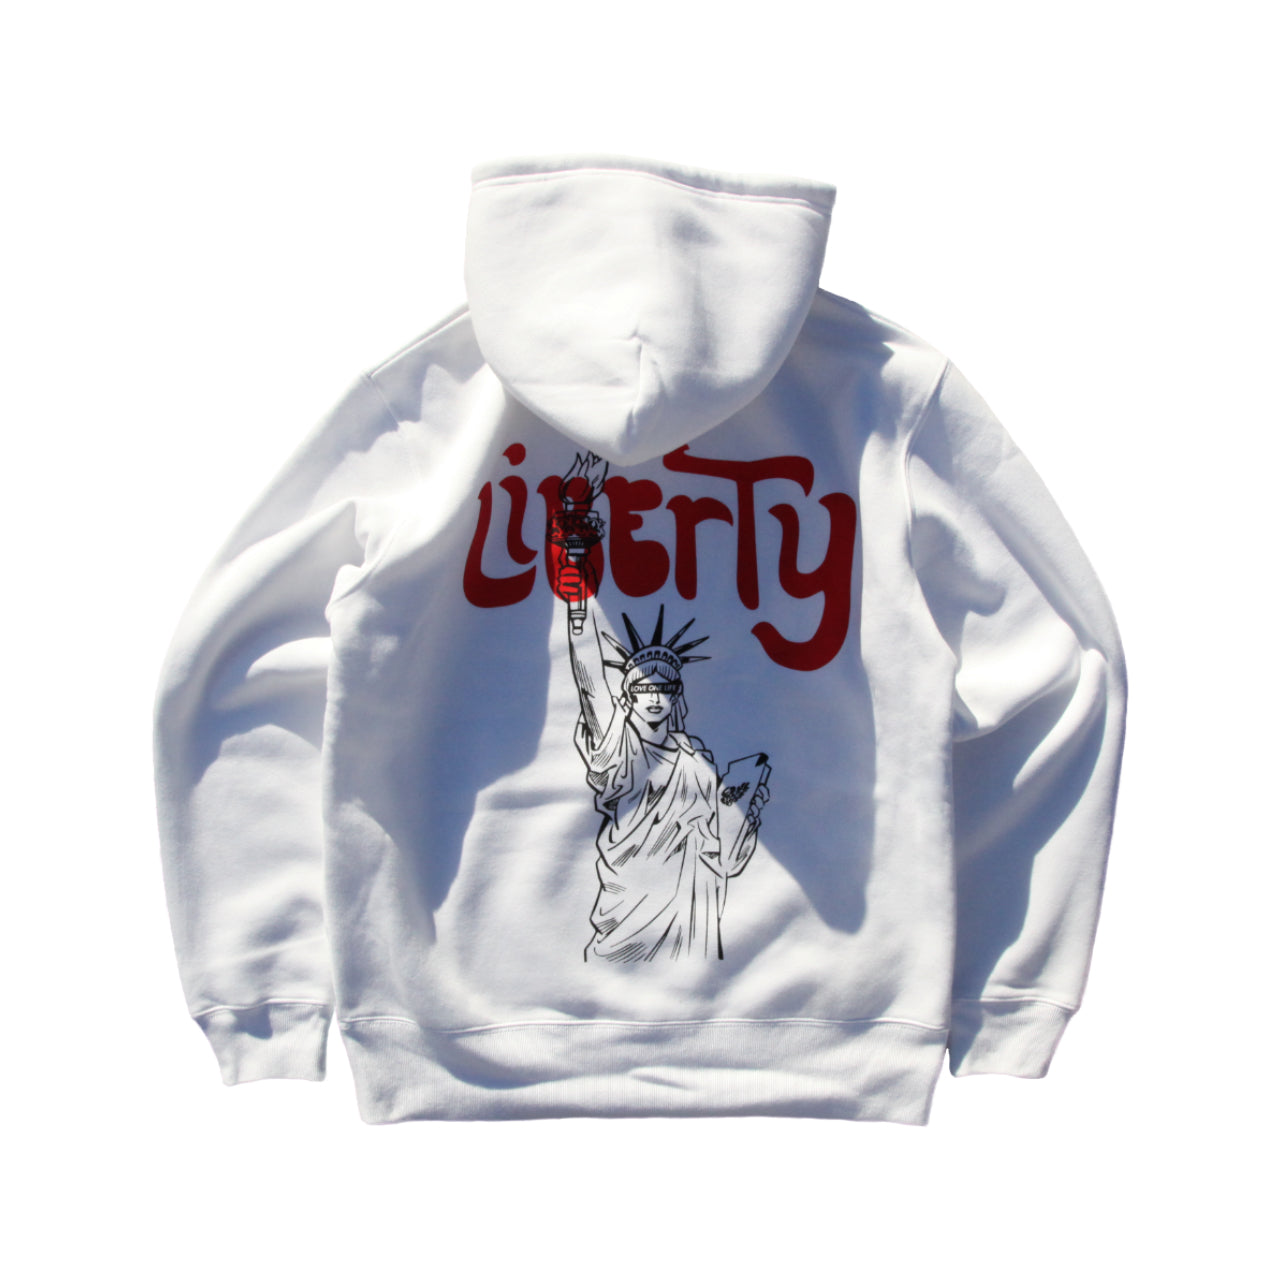 liberty hoodie in white